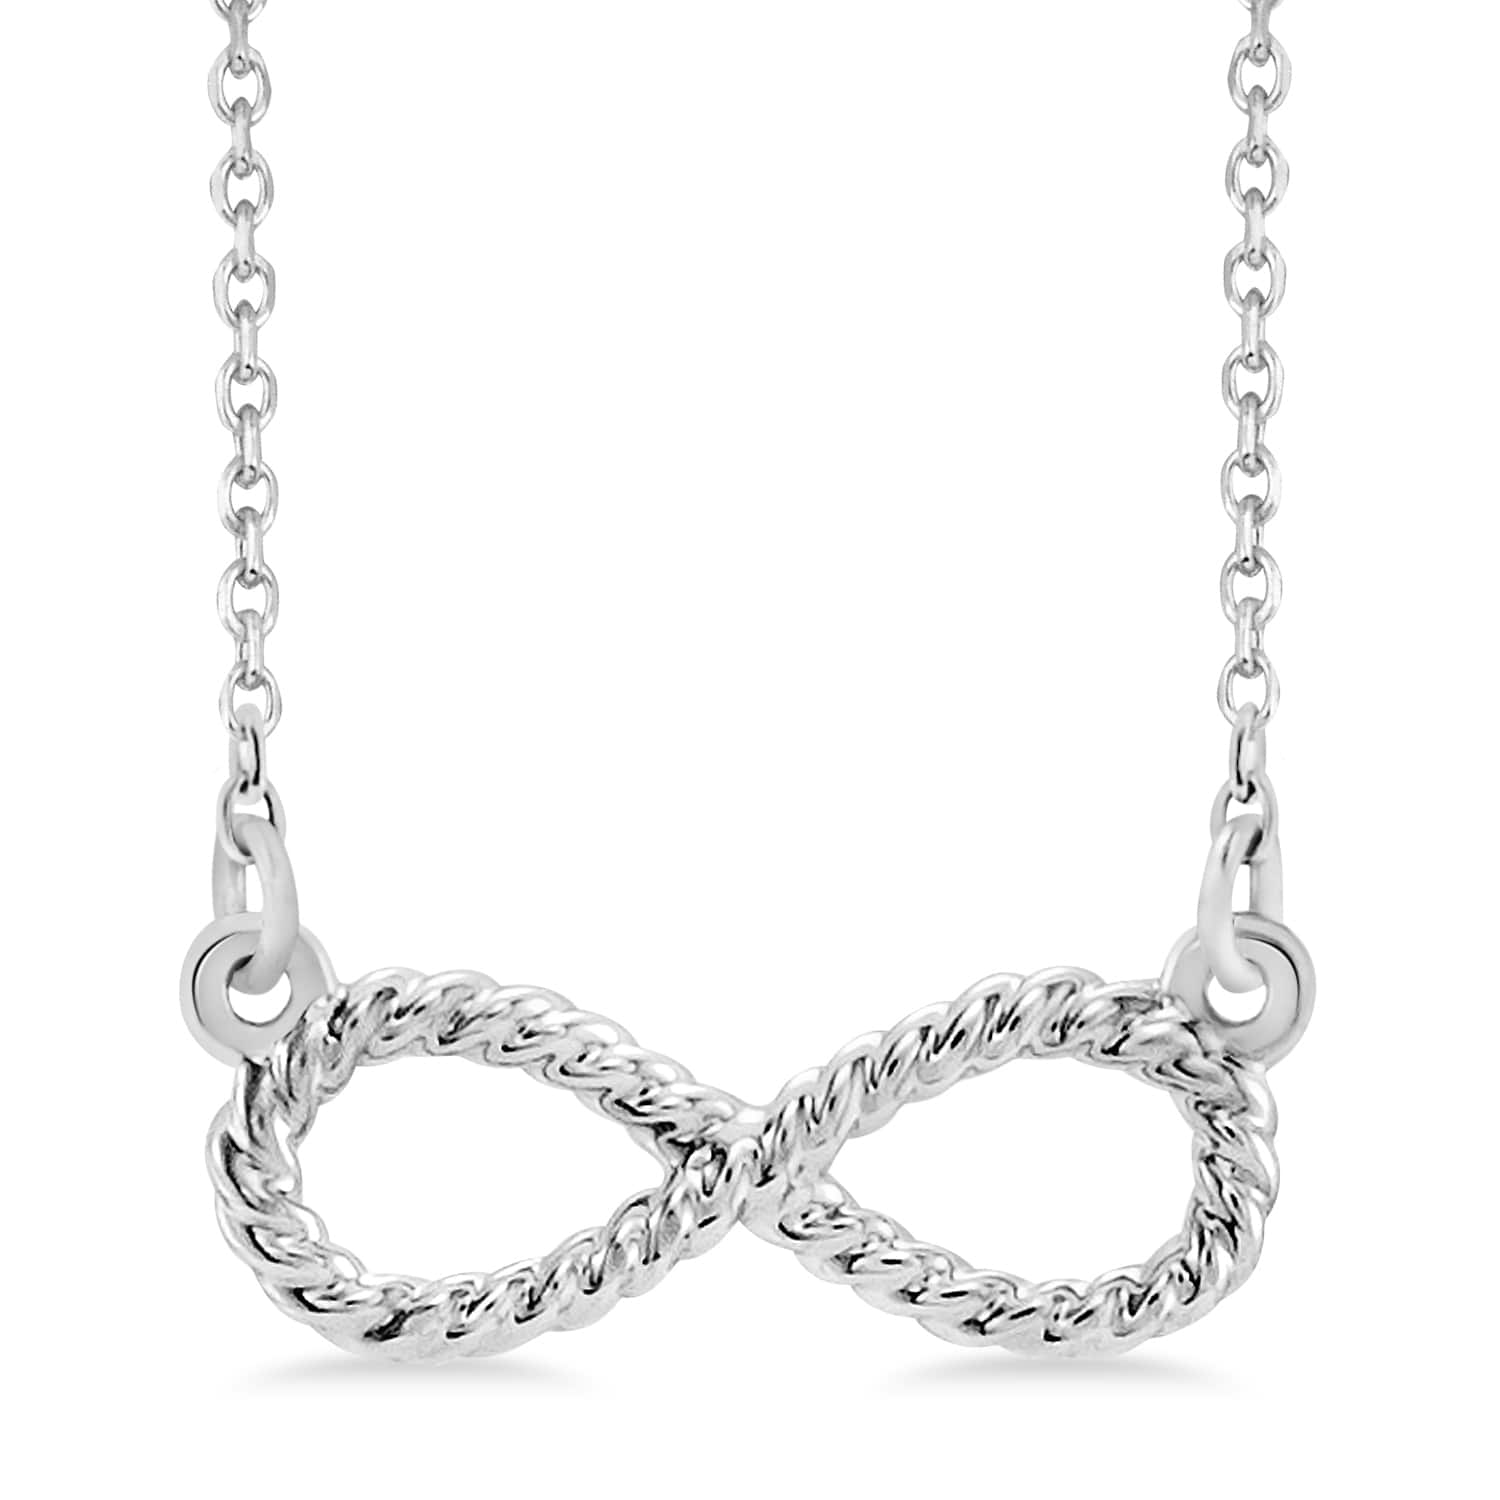 Infinity Rope Pendant Necklace 14k White Gold